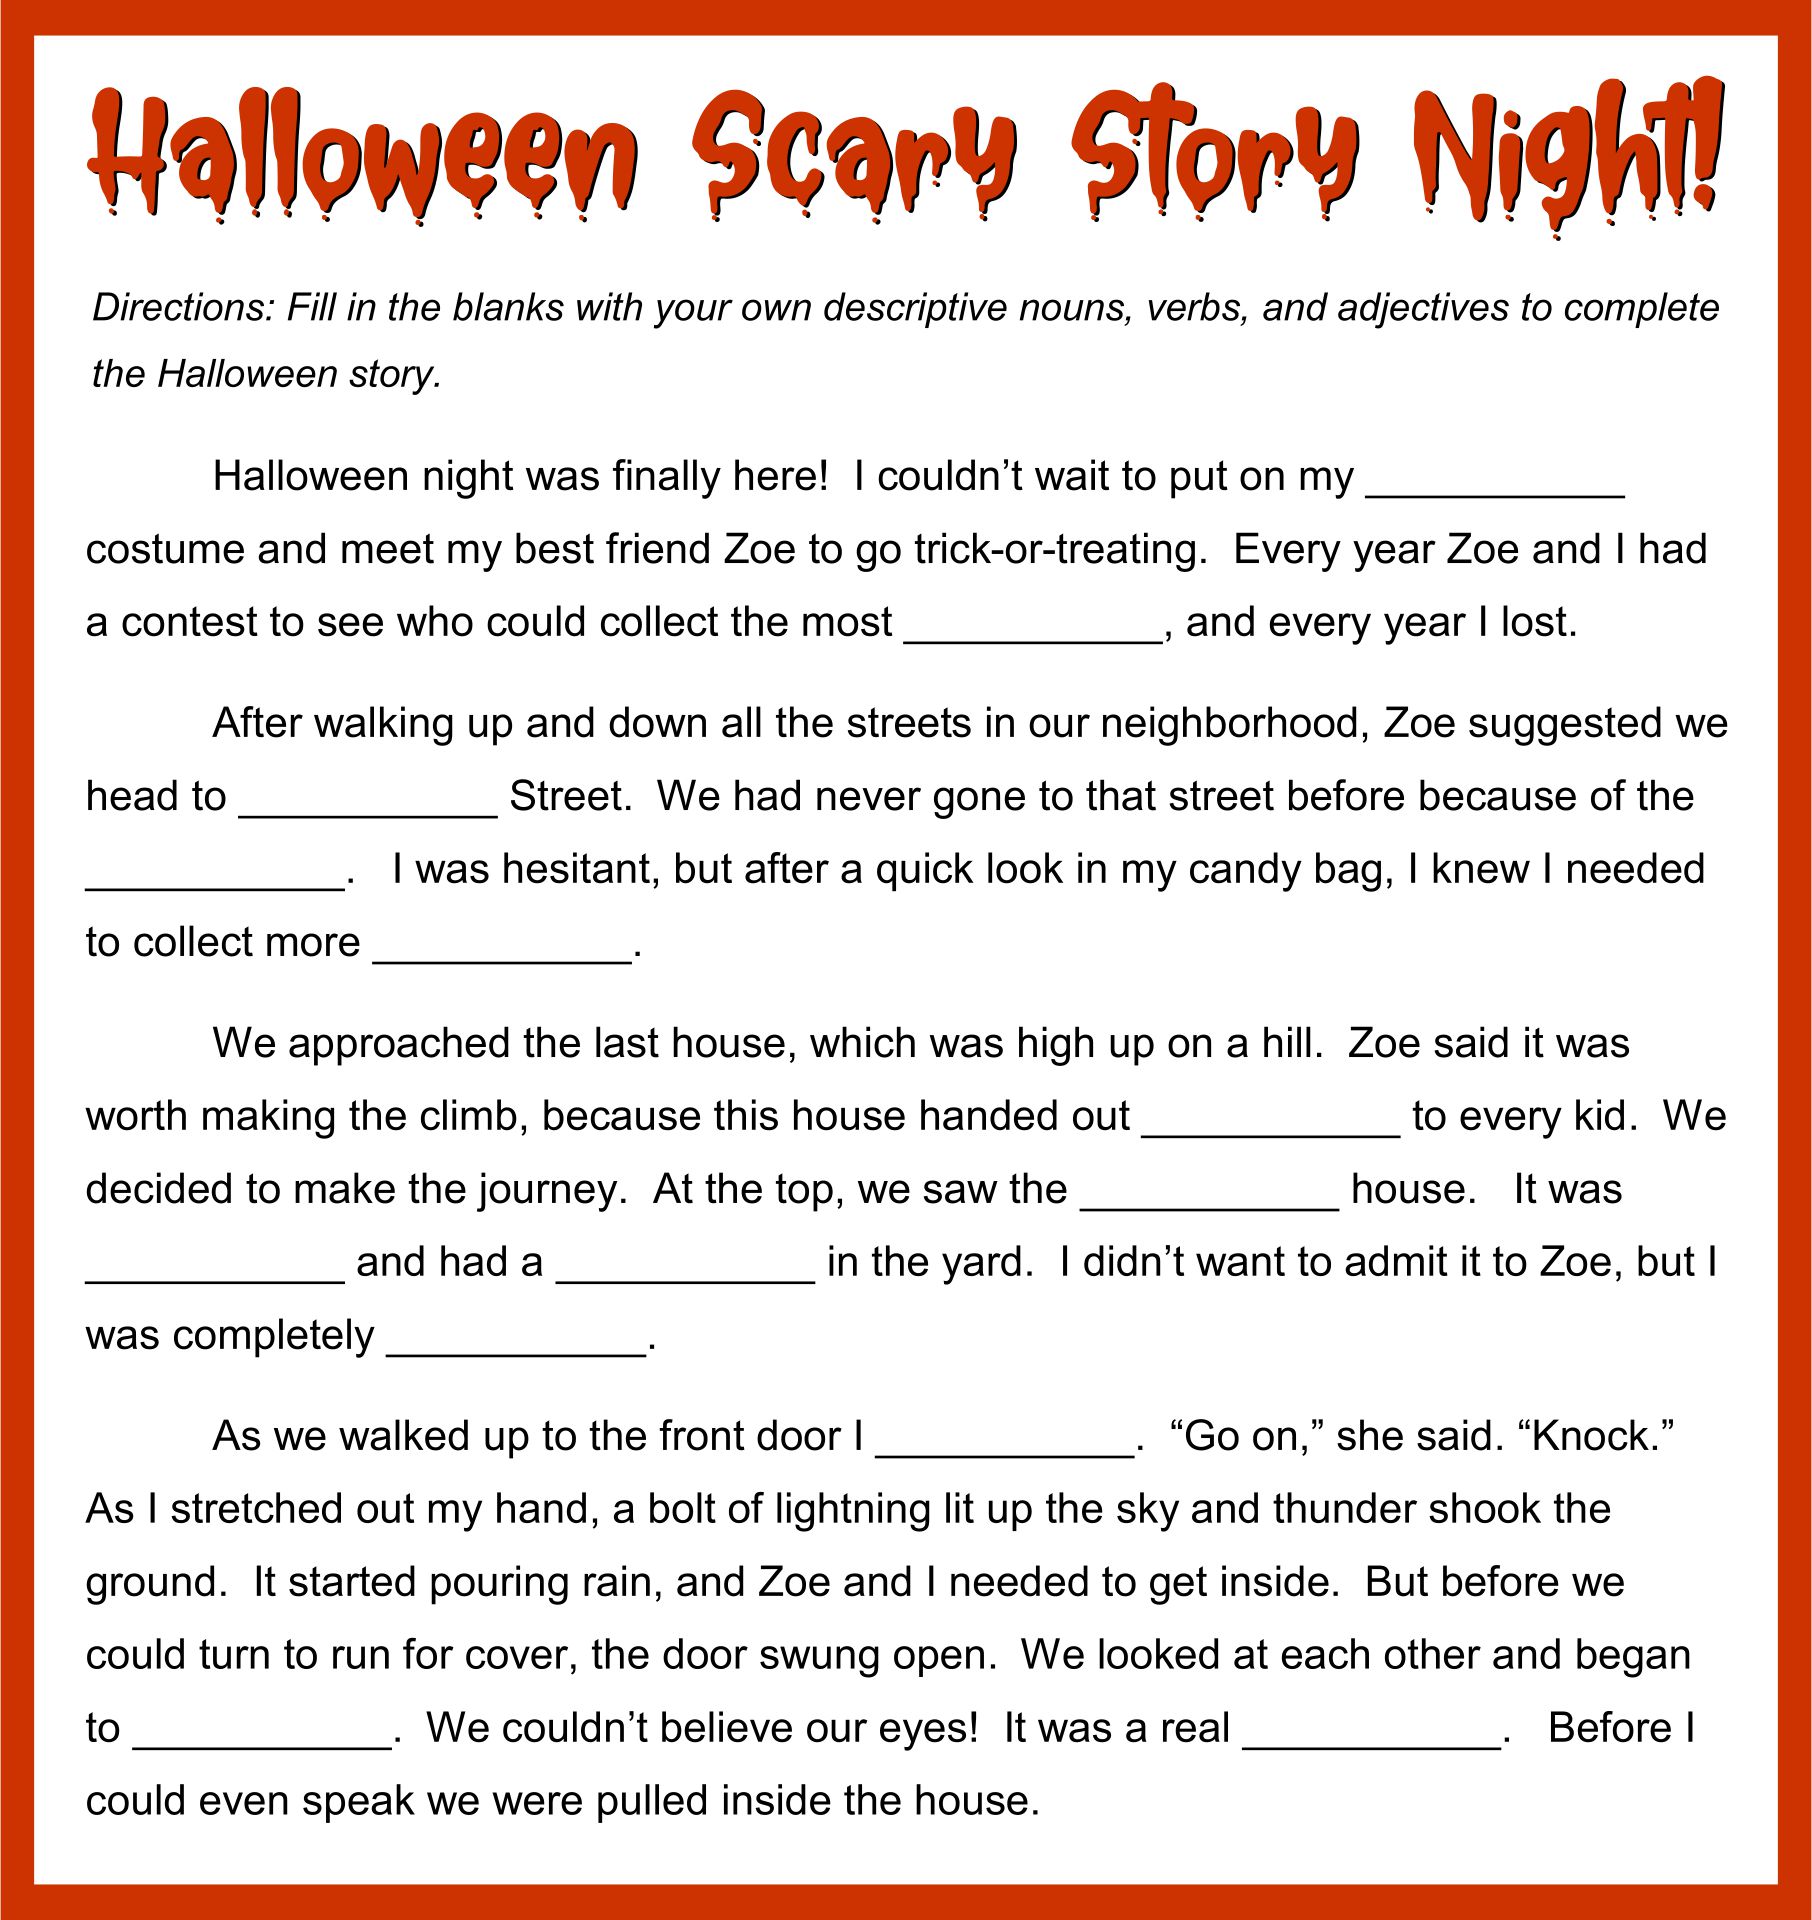 A Scary Halloween Story